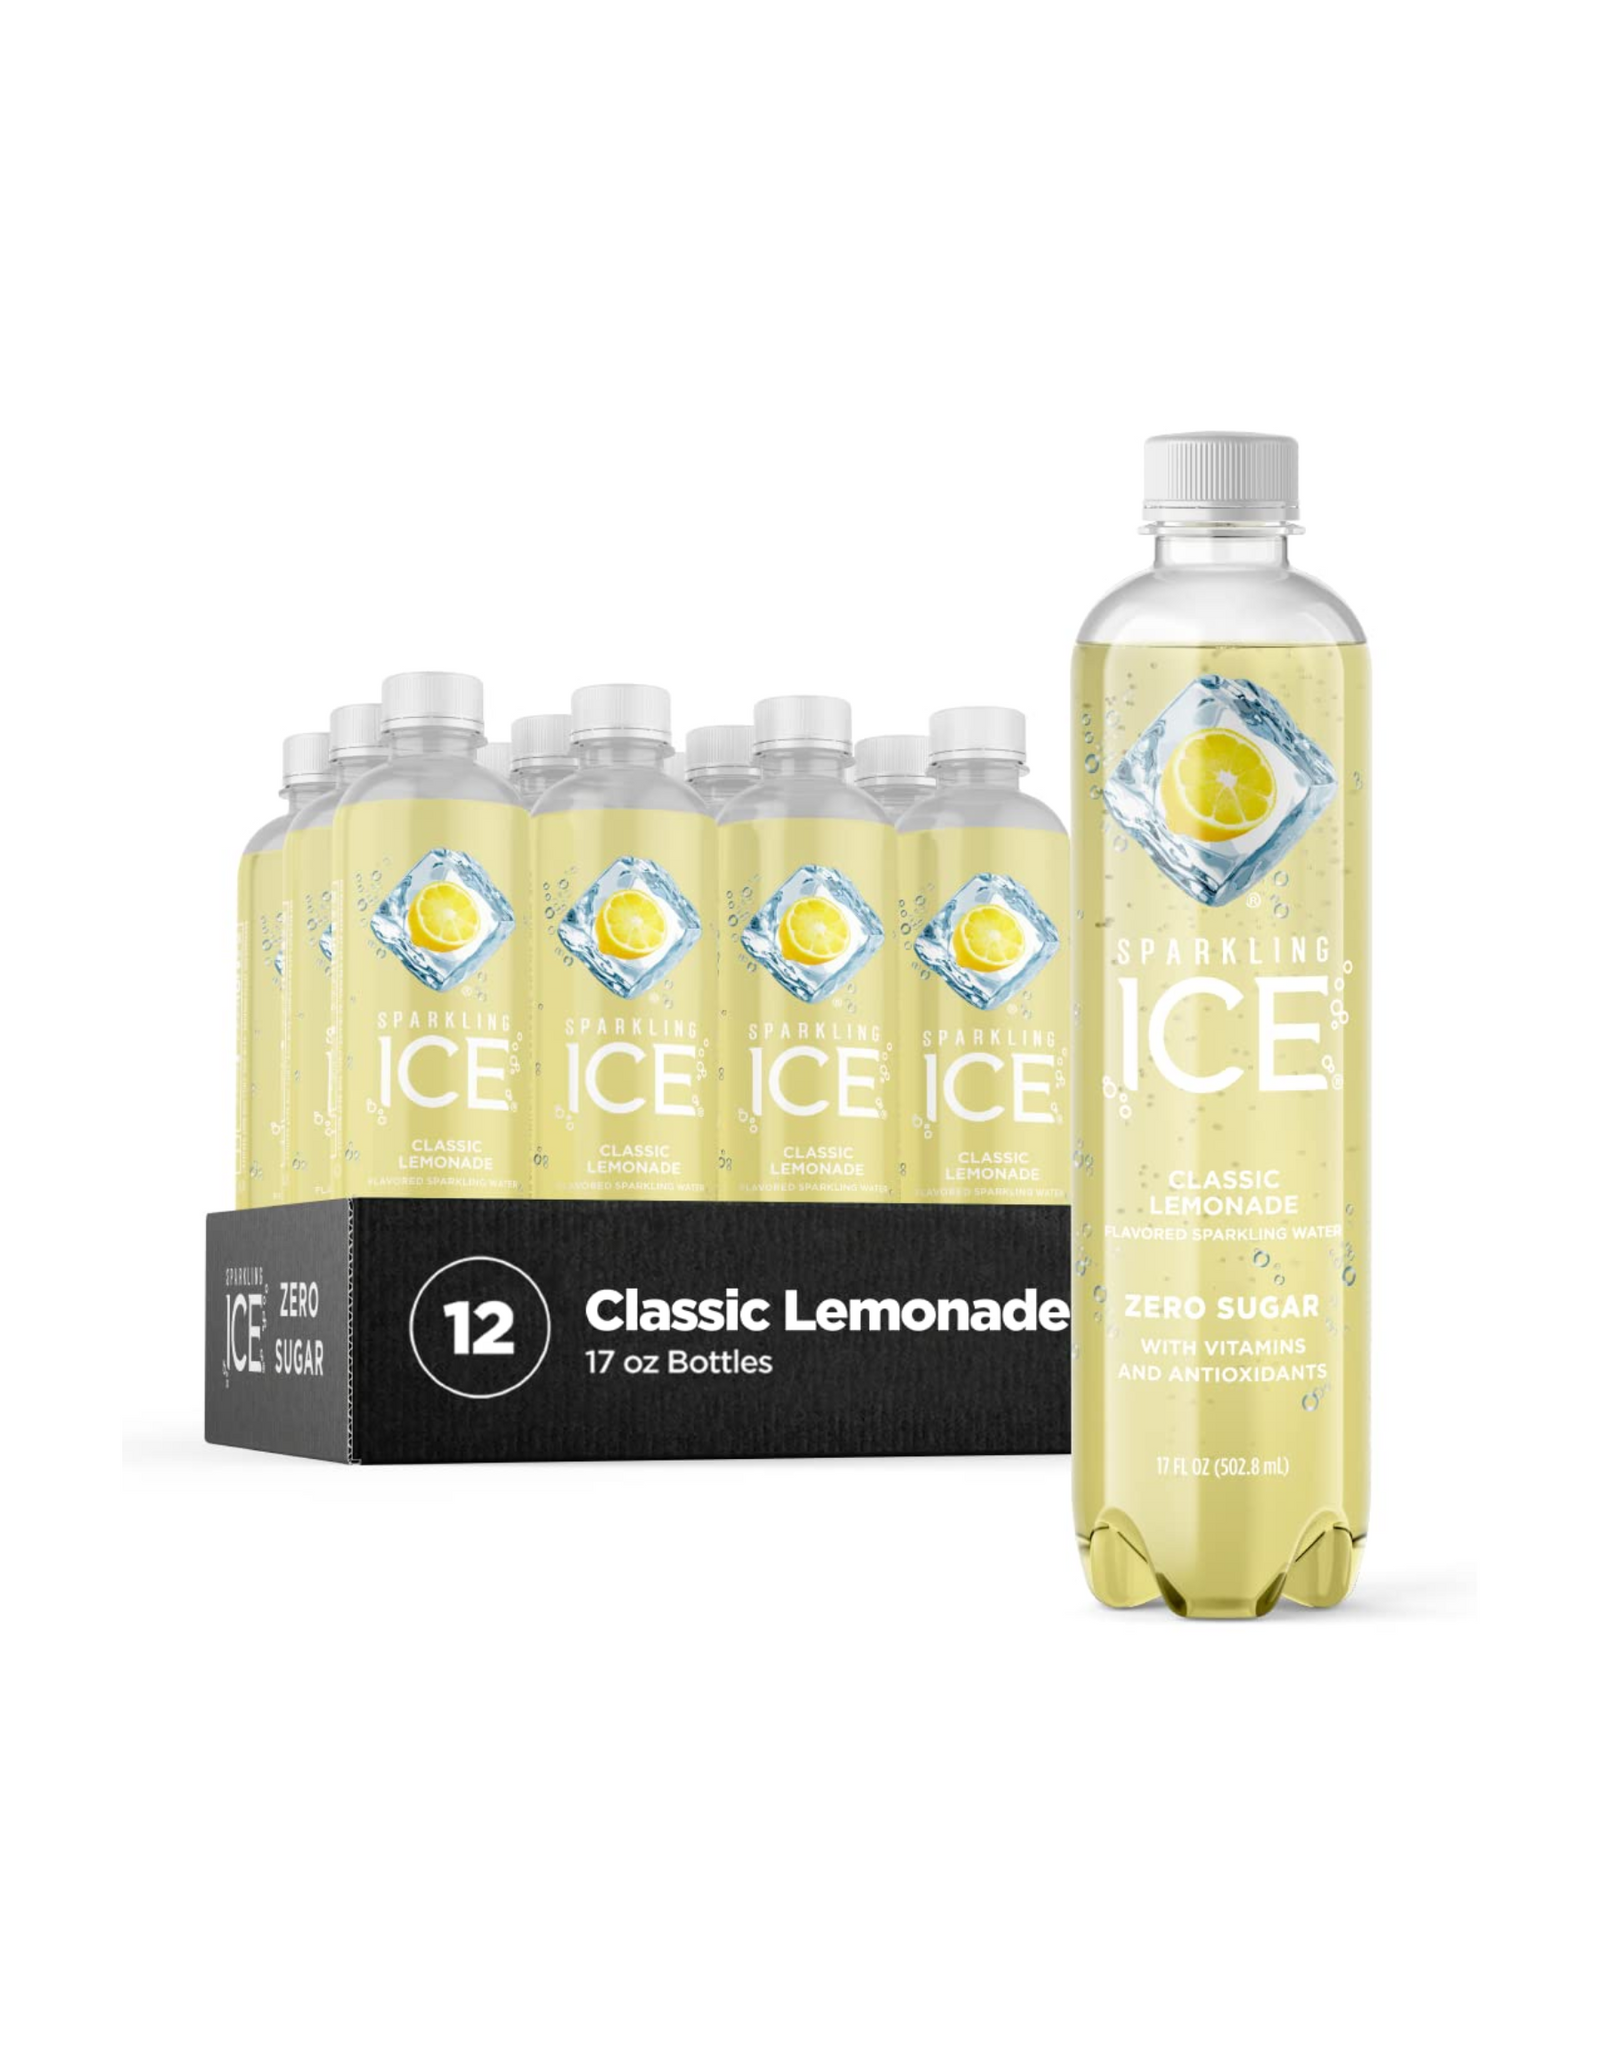 Sparkling Ice, Classic Lemonade Sparkling Water, with Vitamins and Antioxidants, 17 oz (Pack of 12)